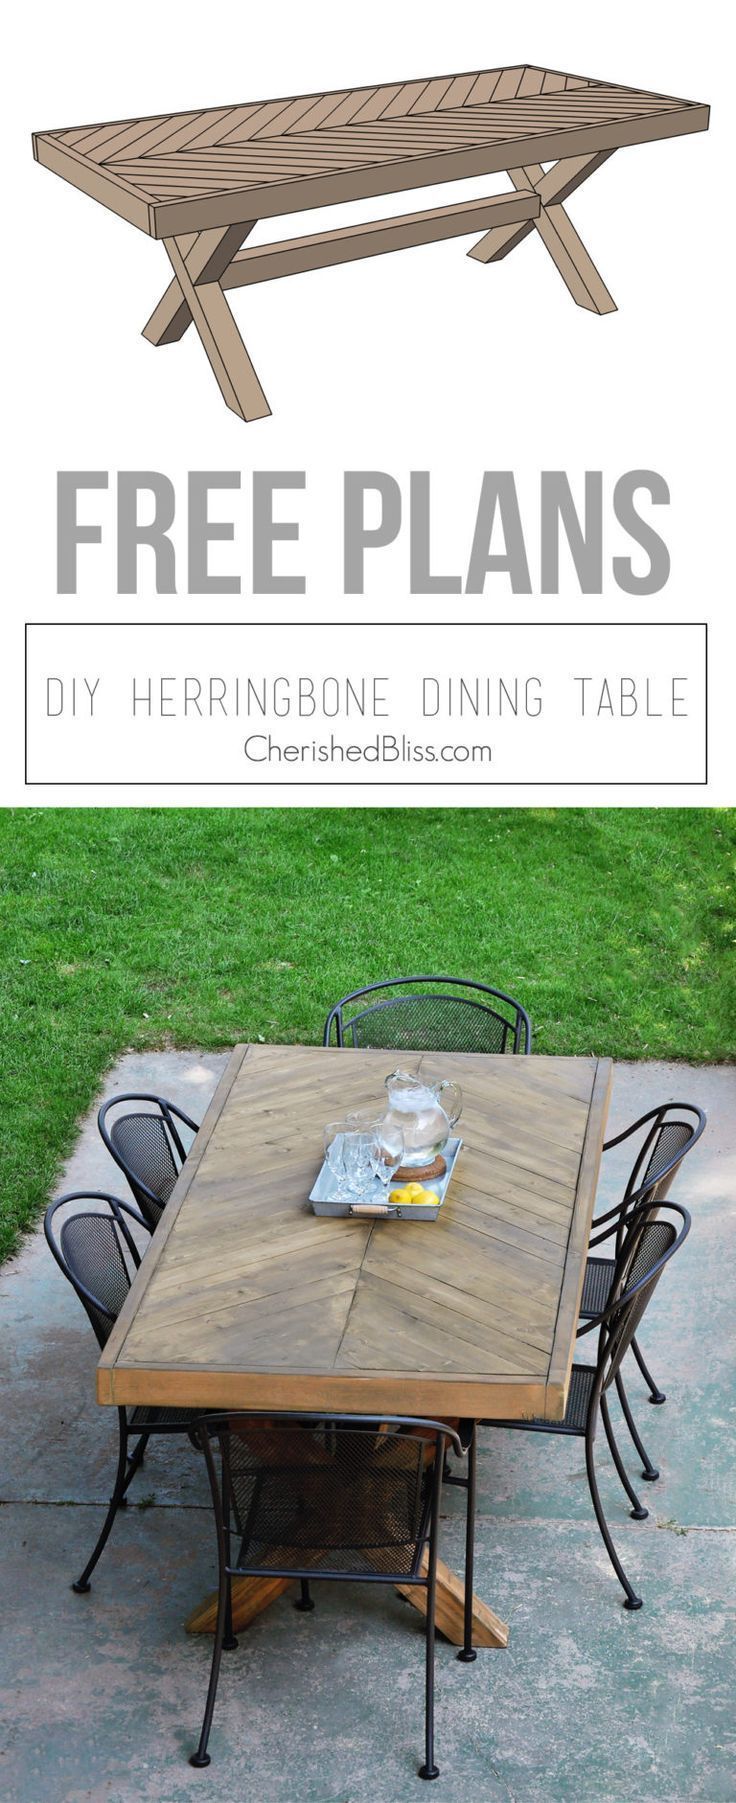 DIY Outdoor Table | Free Plans - Cherished Bliss - DIY Outdoor Table | Free Plans - Cherished Bliss -   15 diy Table rustic ideas